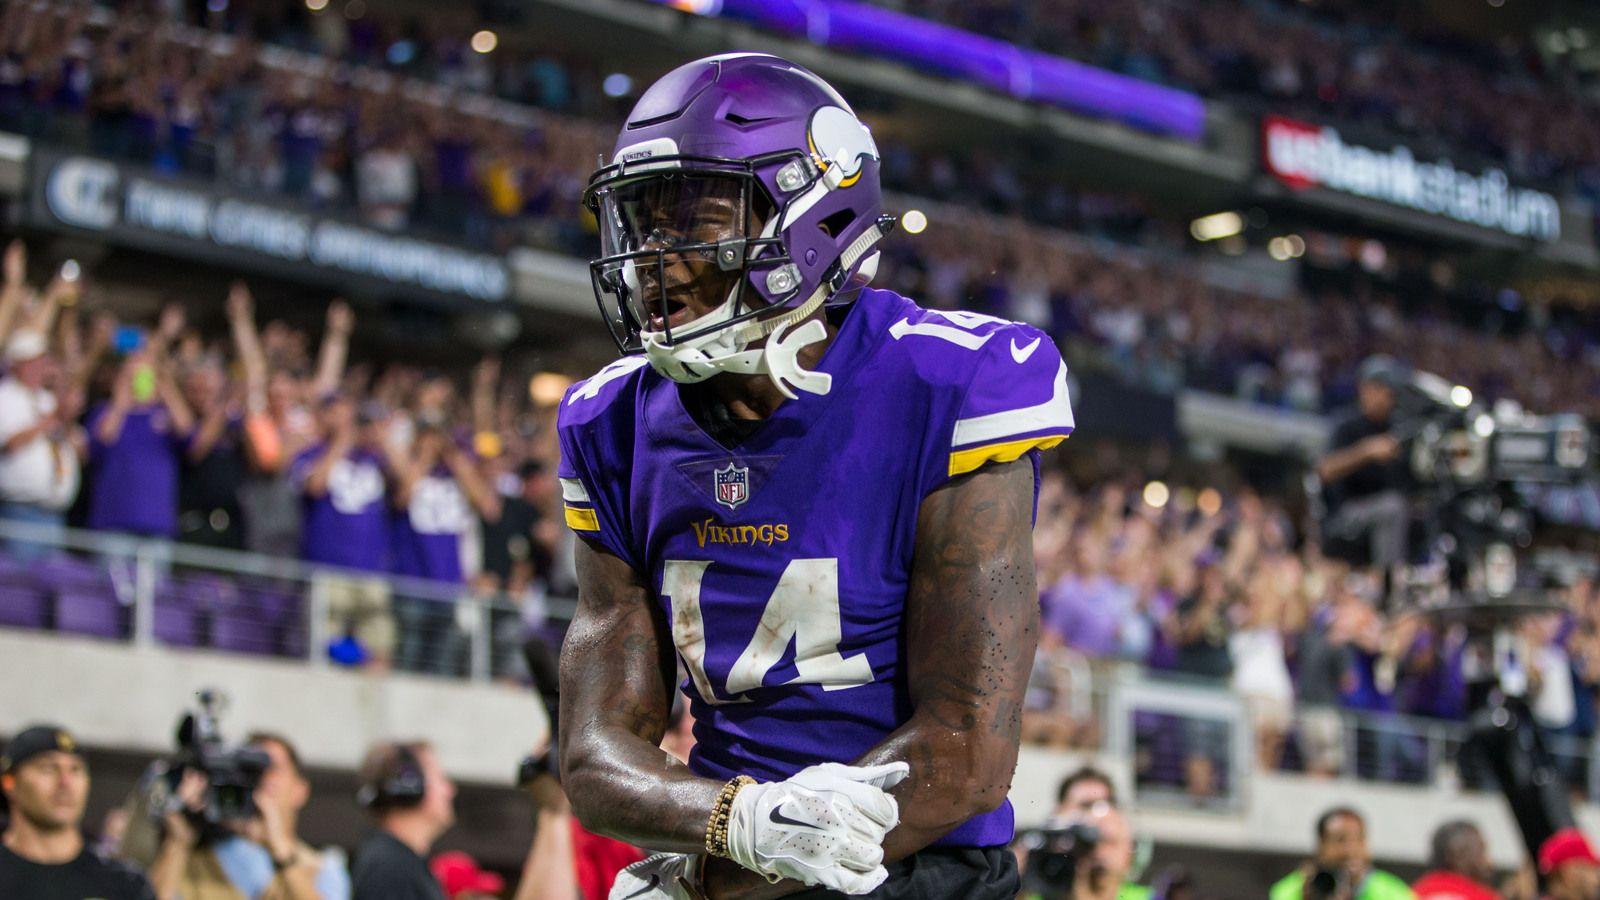 WATCH: Stefon Diggs punts ball into stands after contested TD